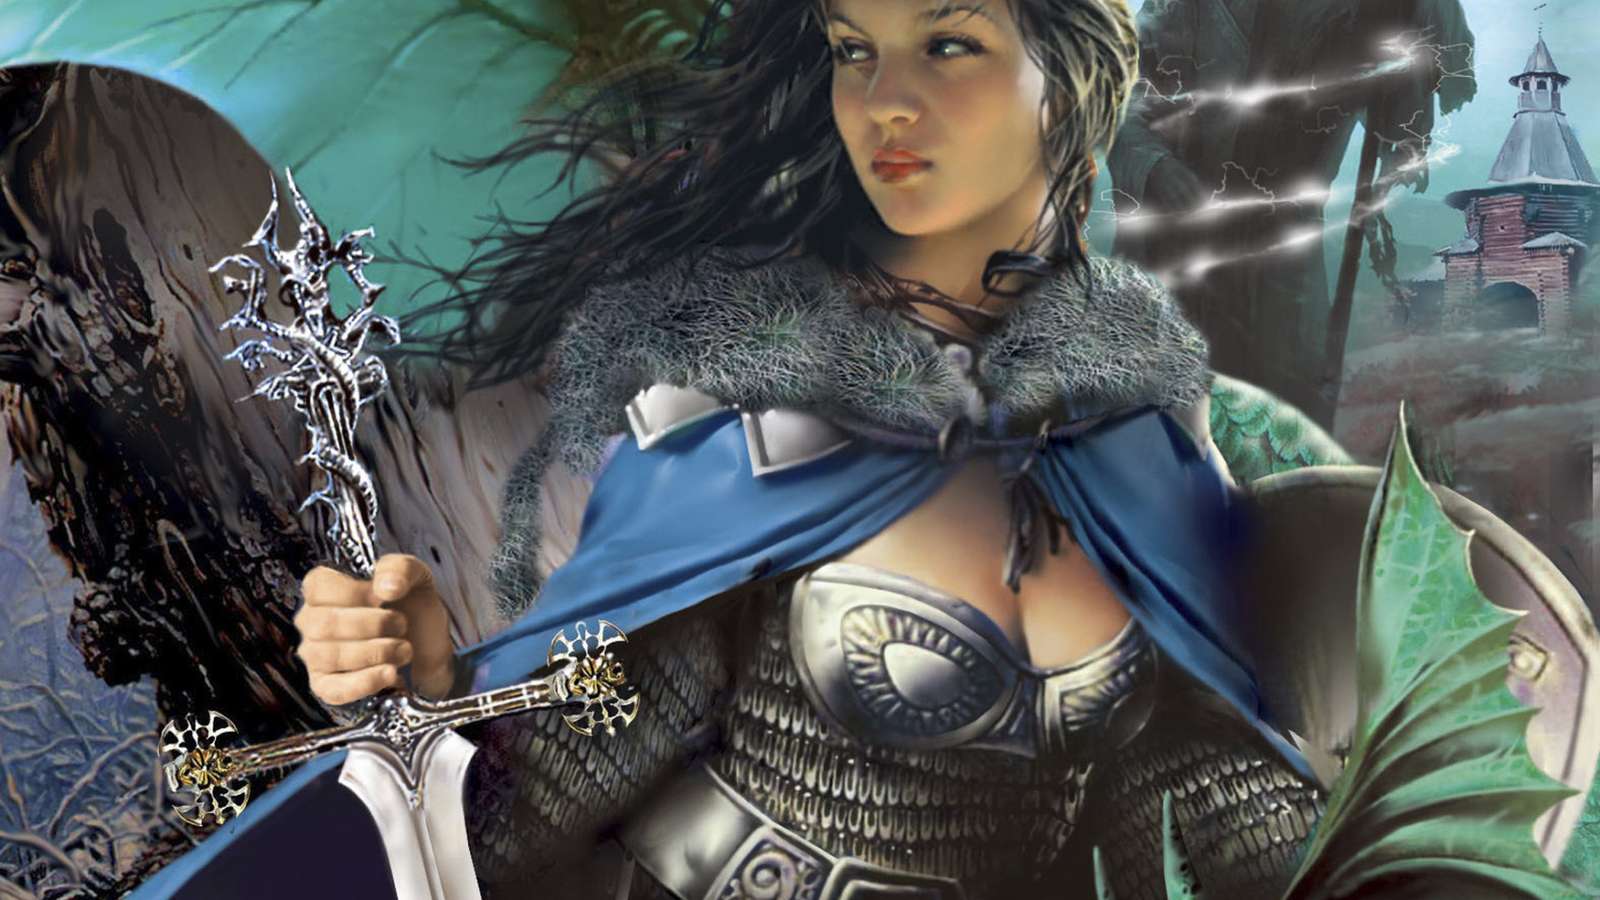 Woman paladin with sword puzzle online from photo